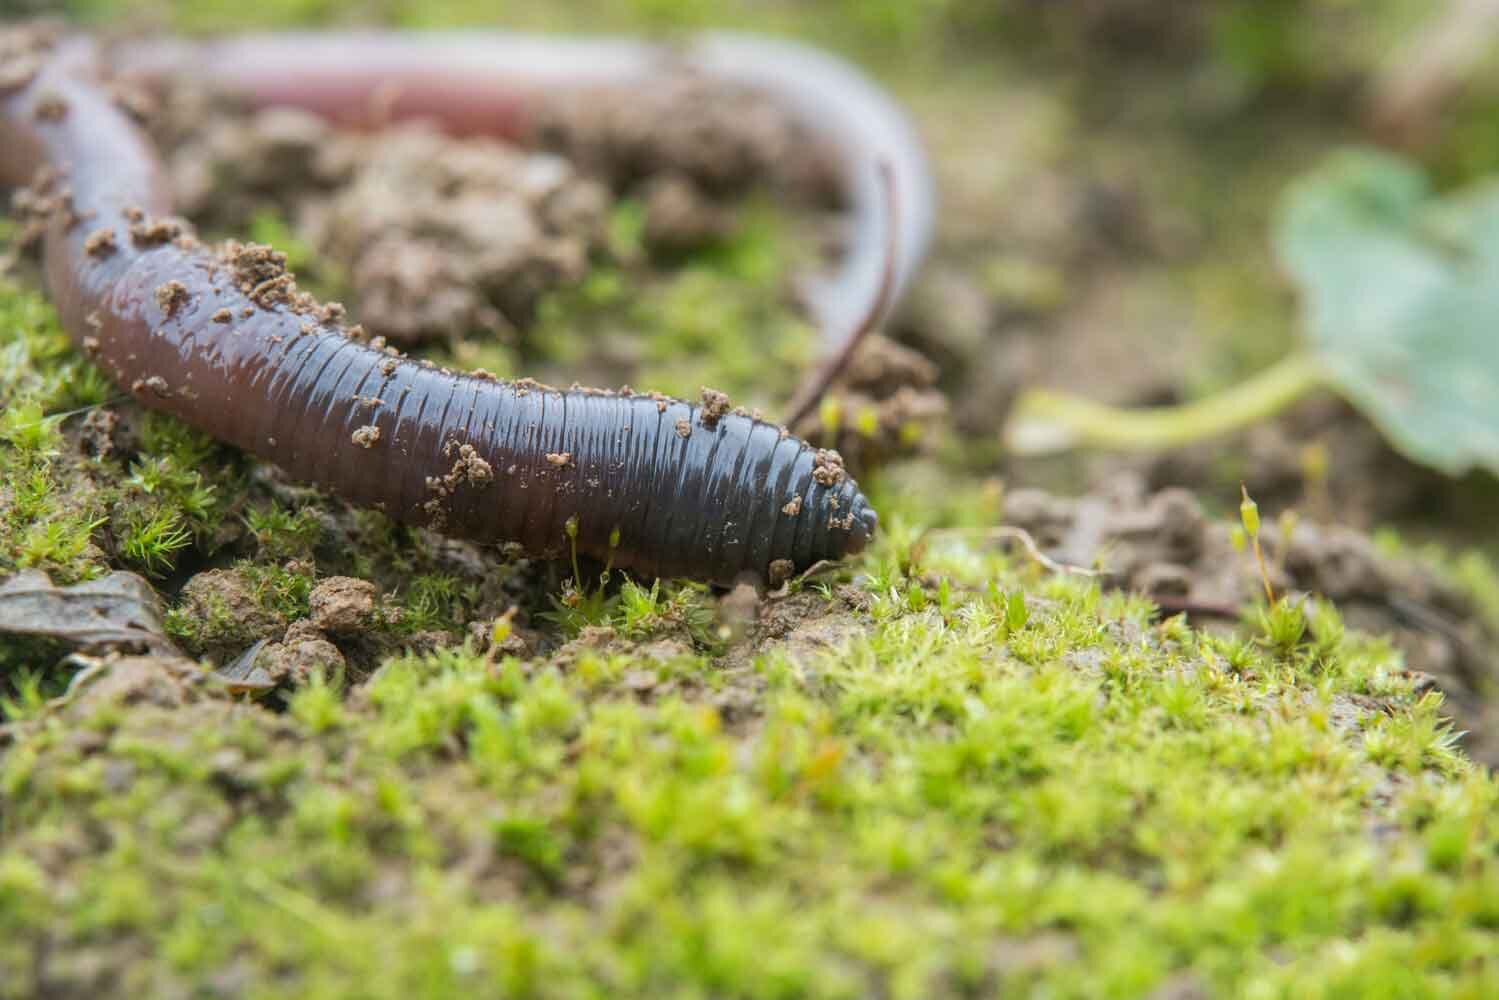 #European earthworms reduce insect populations in North American forests